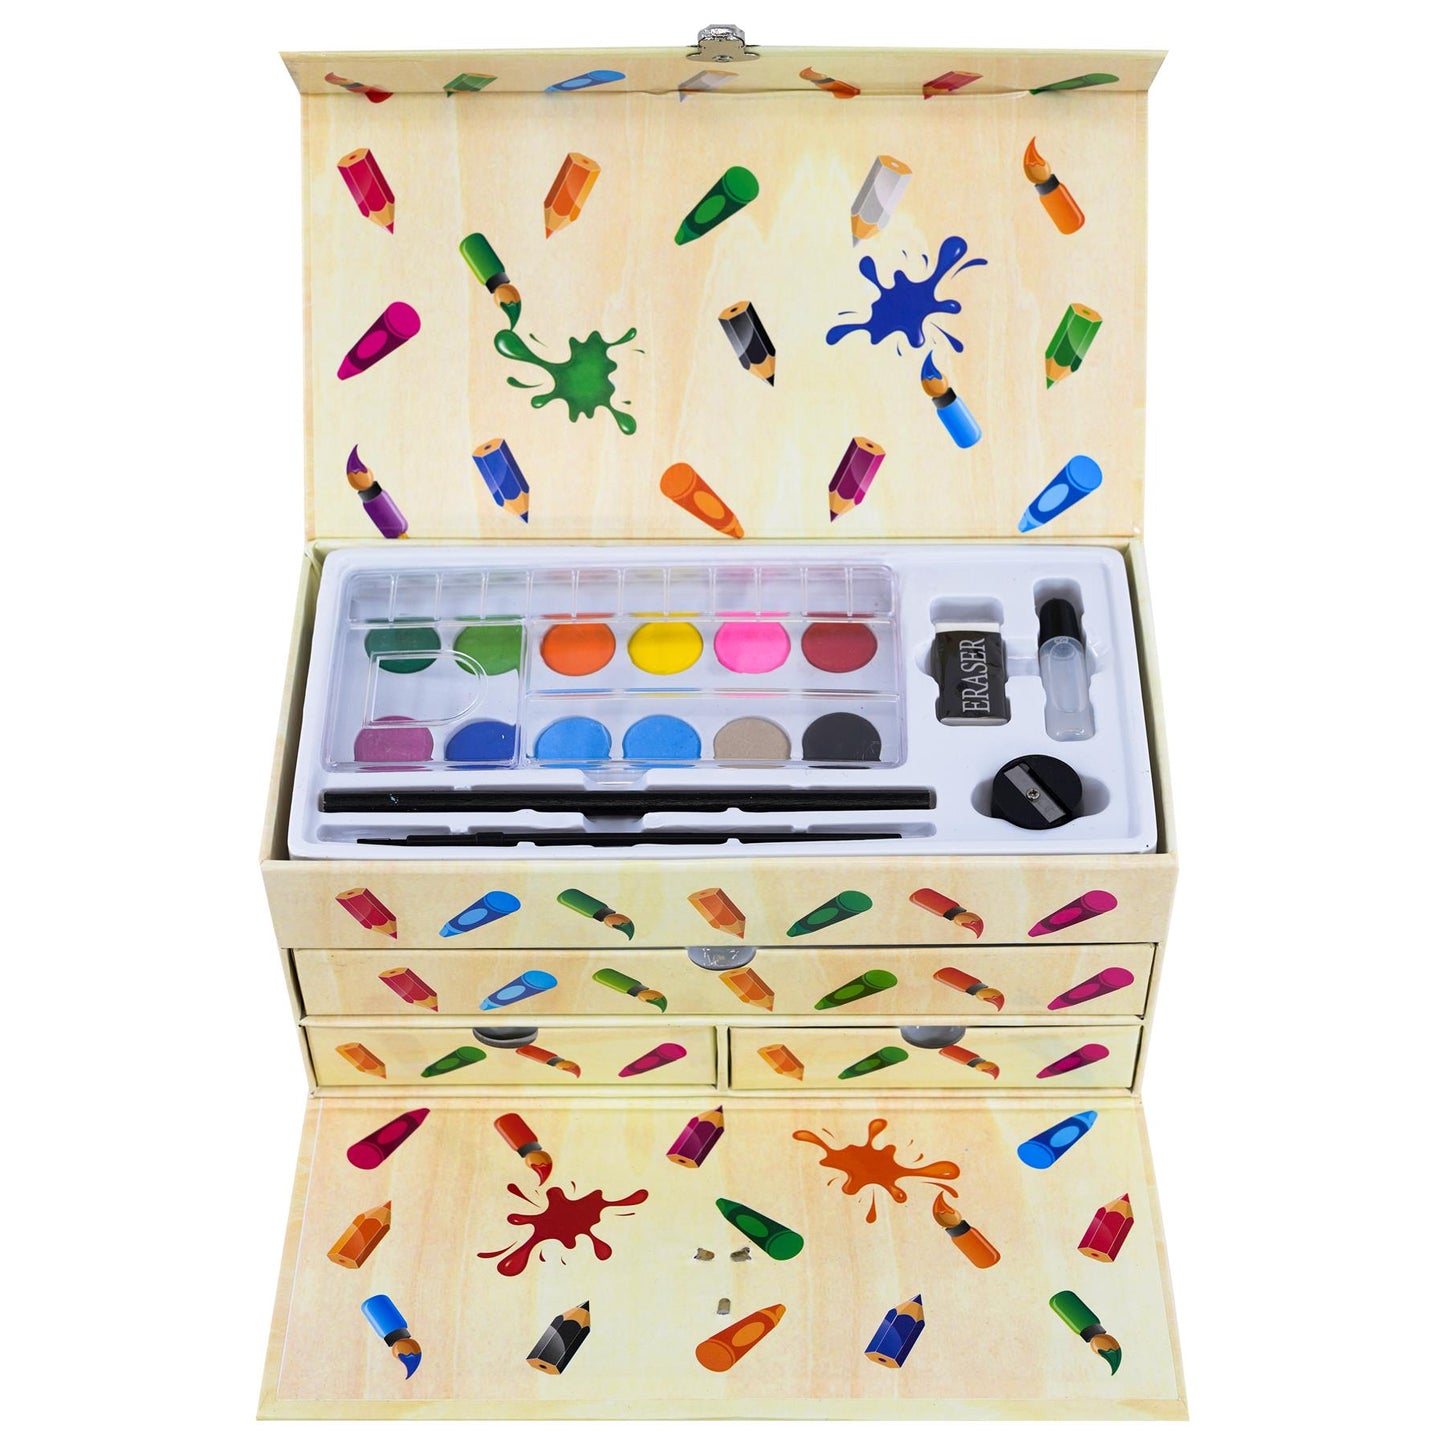 54 Pieces Craft Art Set in A Box by MTS - UKBuyZone